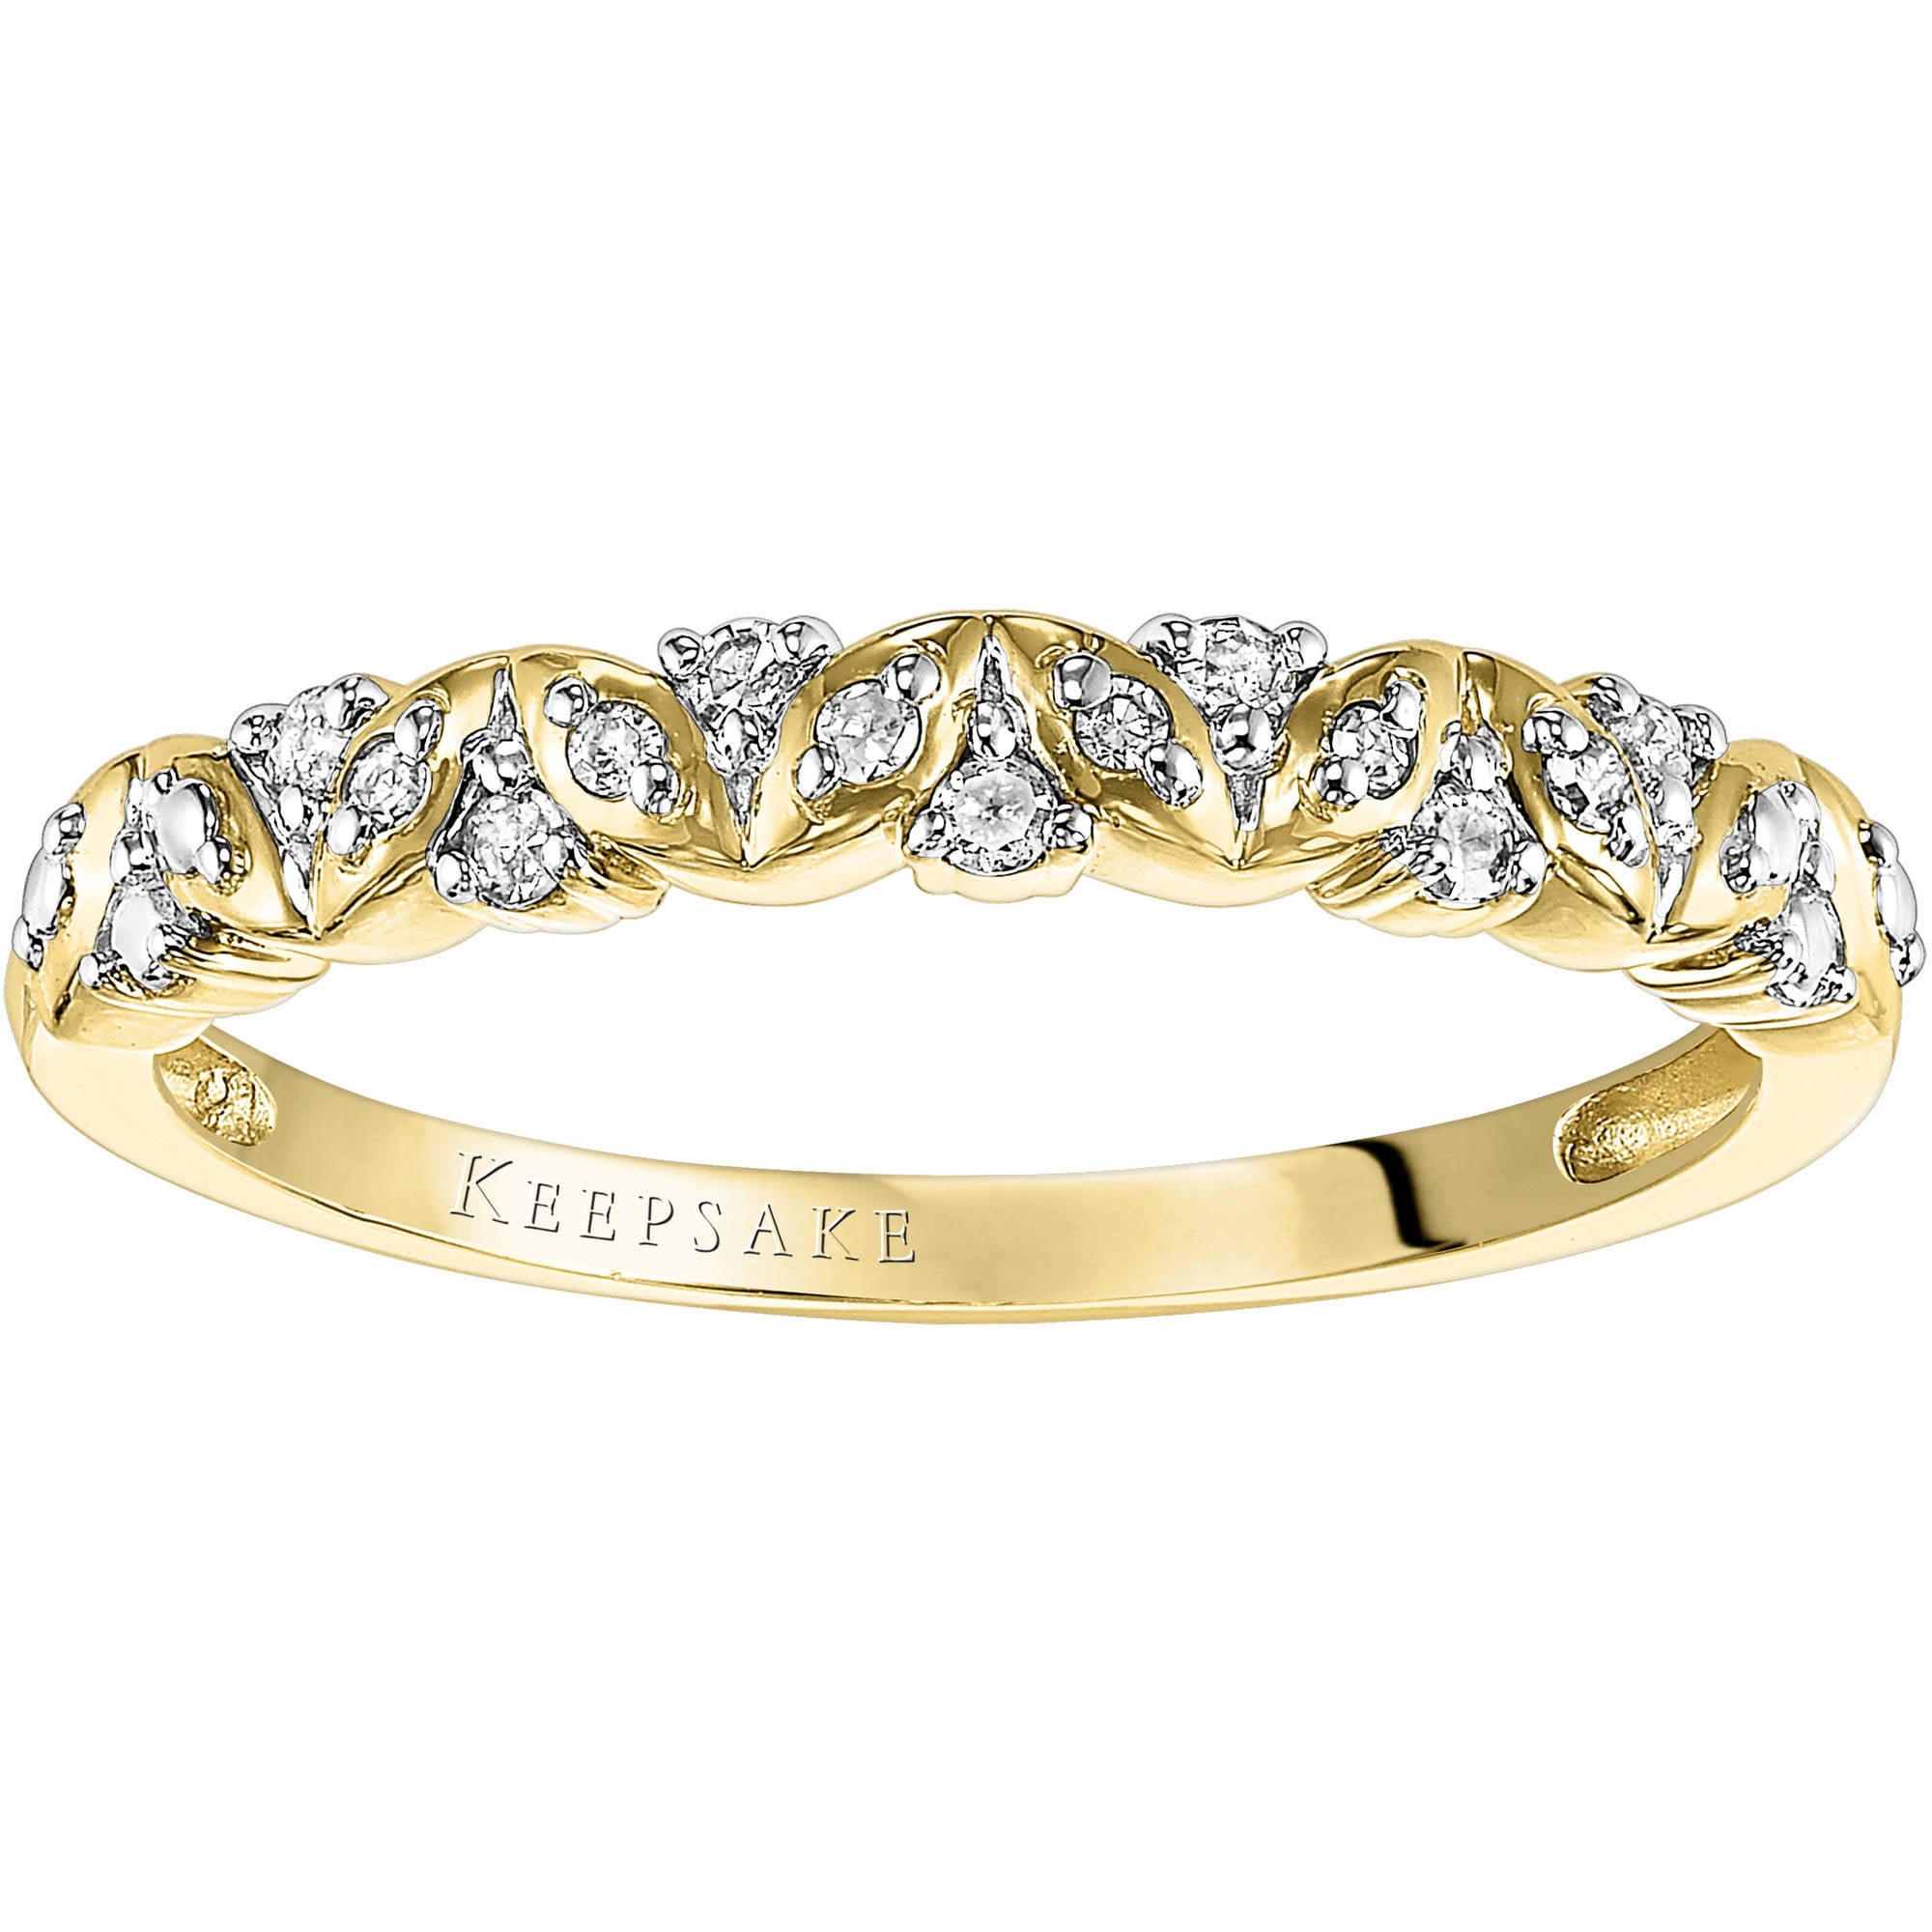 Sweet Remembrance 1/10 Carat T.W. Certified Diamond 10kt Yellow Gold Anniversary Band